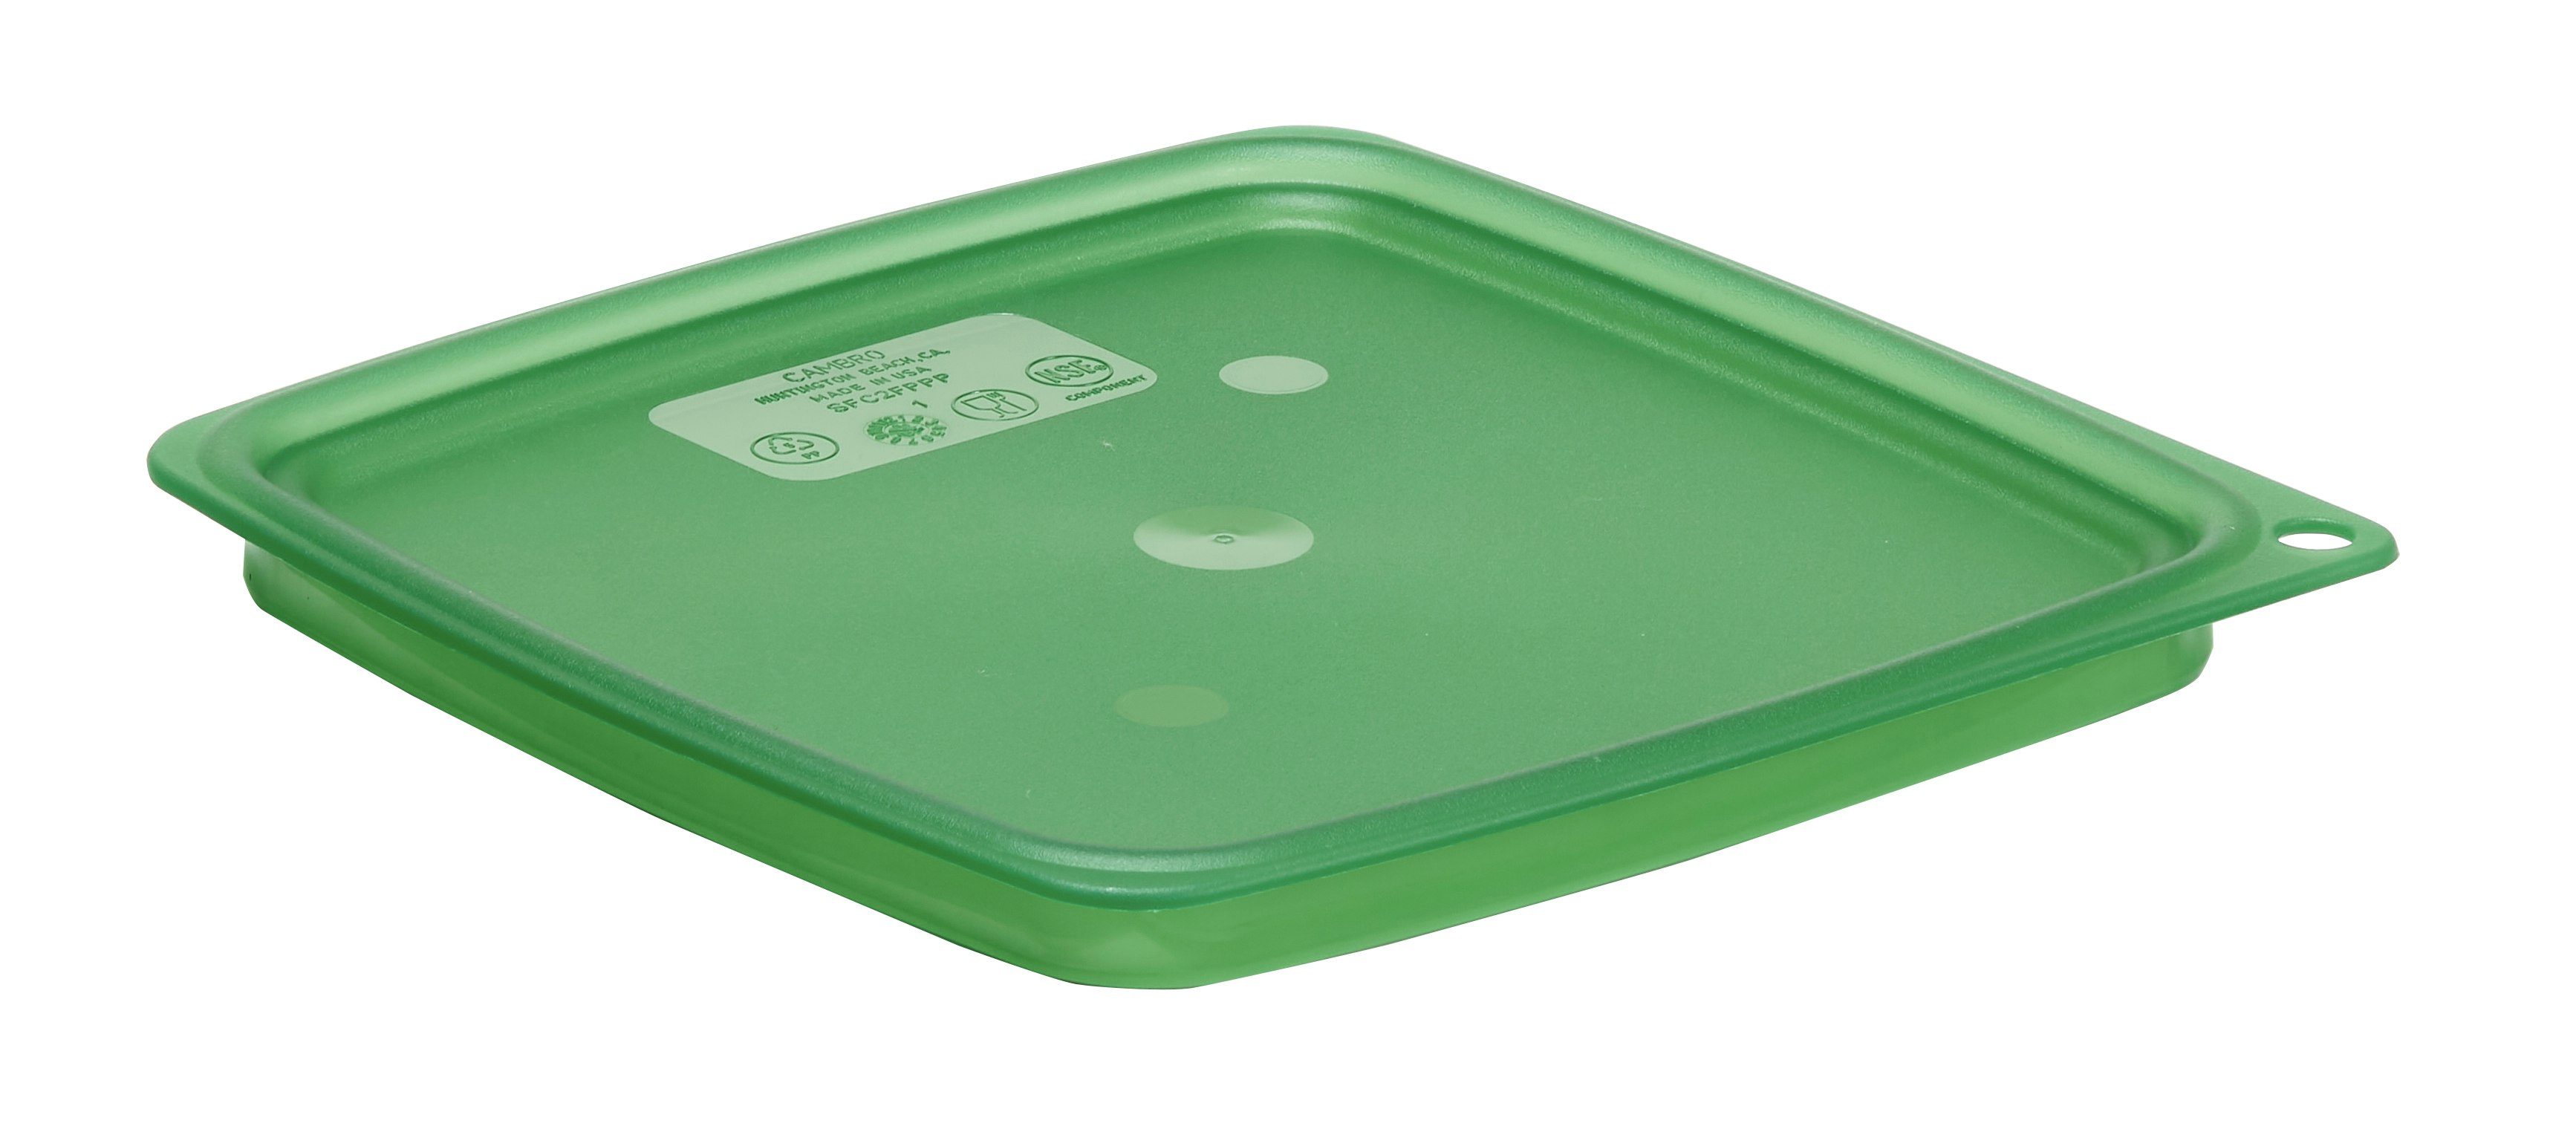 https://cambro-dam.imgix.net/W9JOI01Y/at/h32t9vgh57fcwj9chtb2p9h/SFC2FPPP265_FreshPro_CamSquares_Easy_Seal_Cover_Green_Angle.jpg?dl